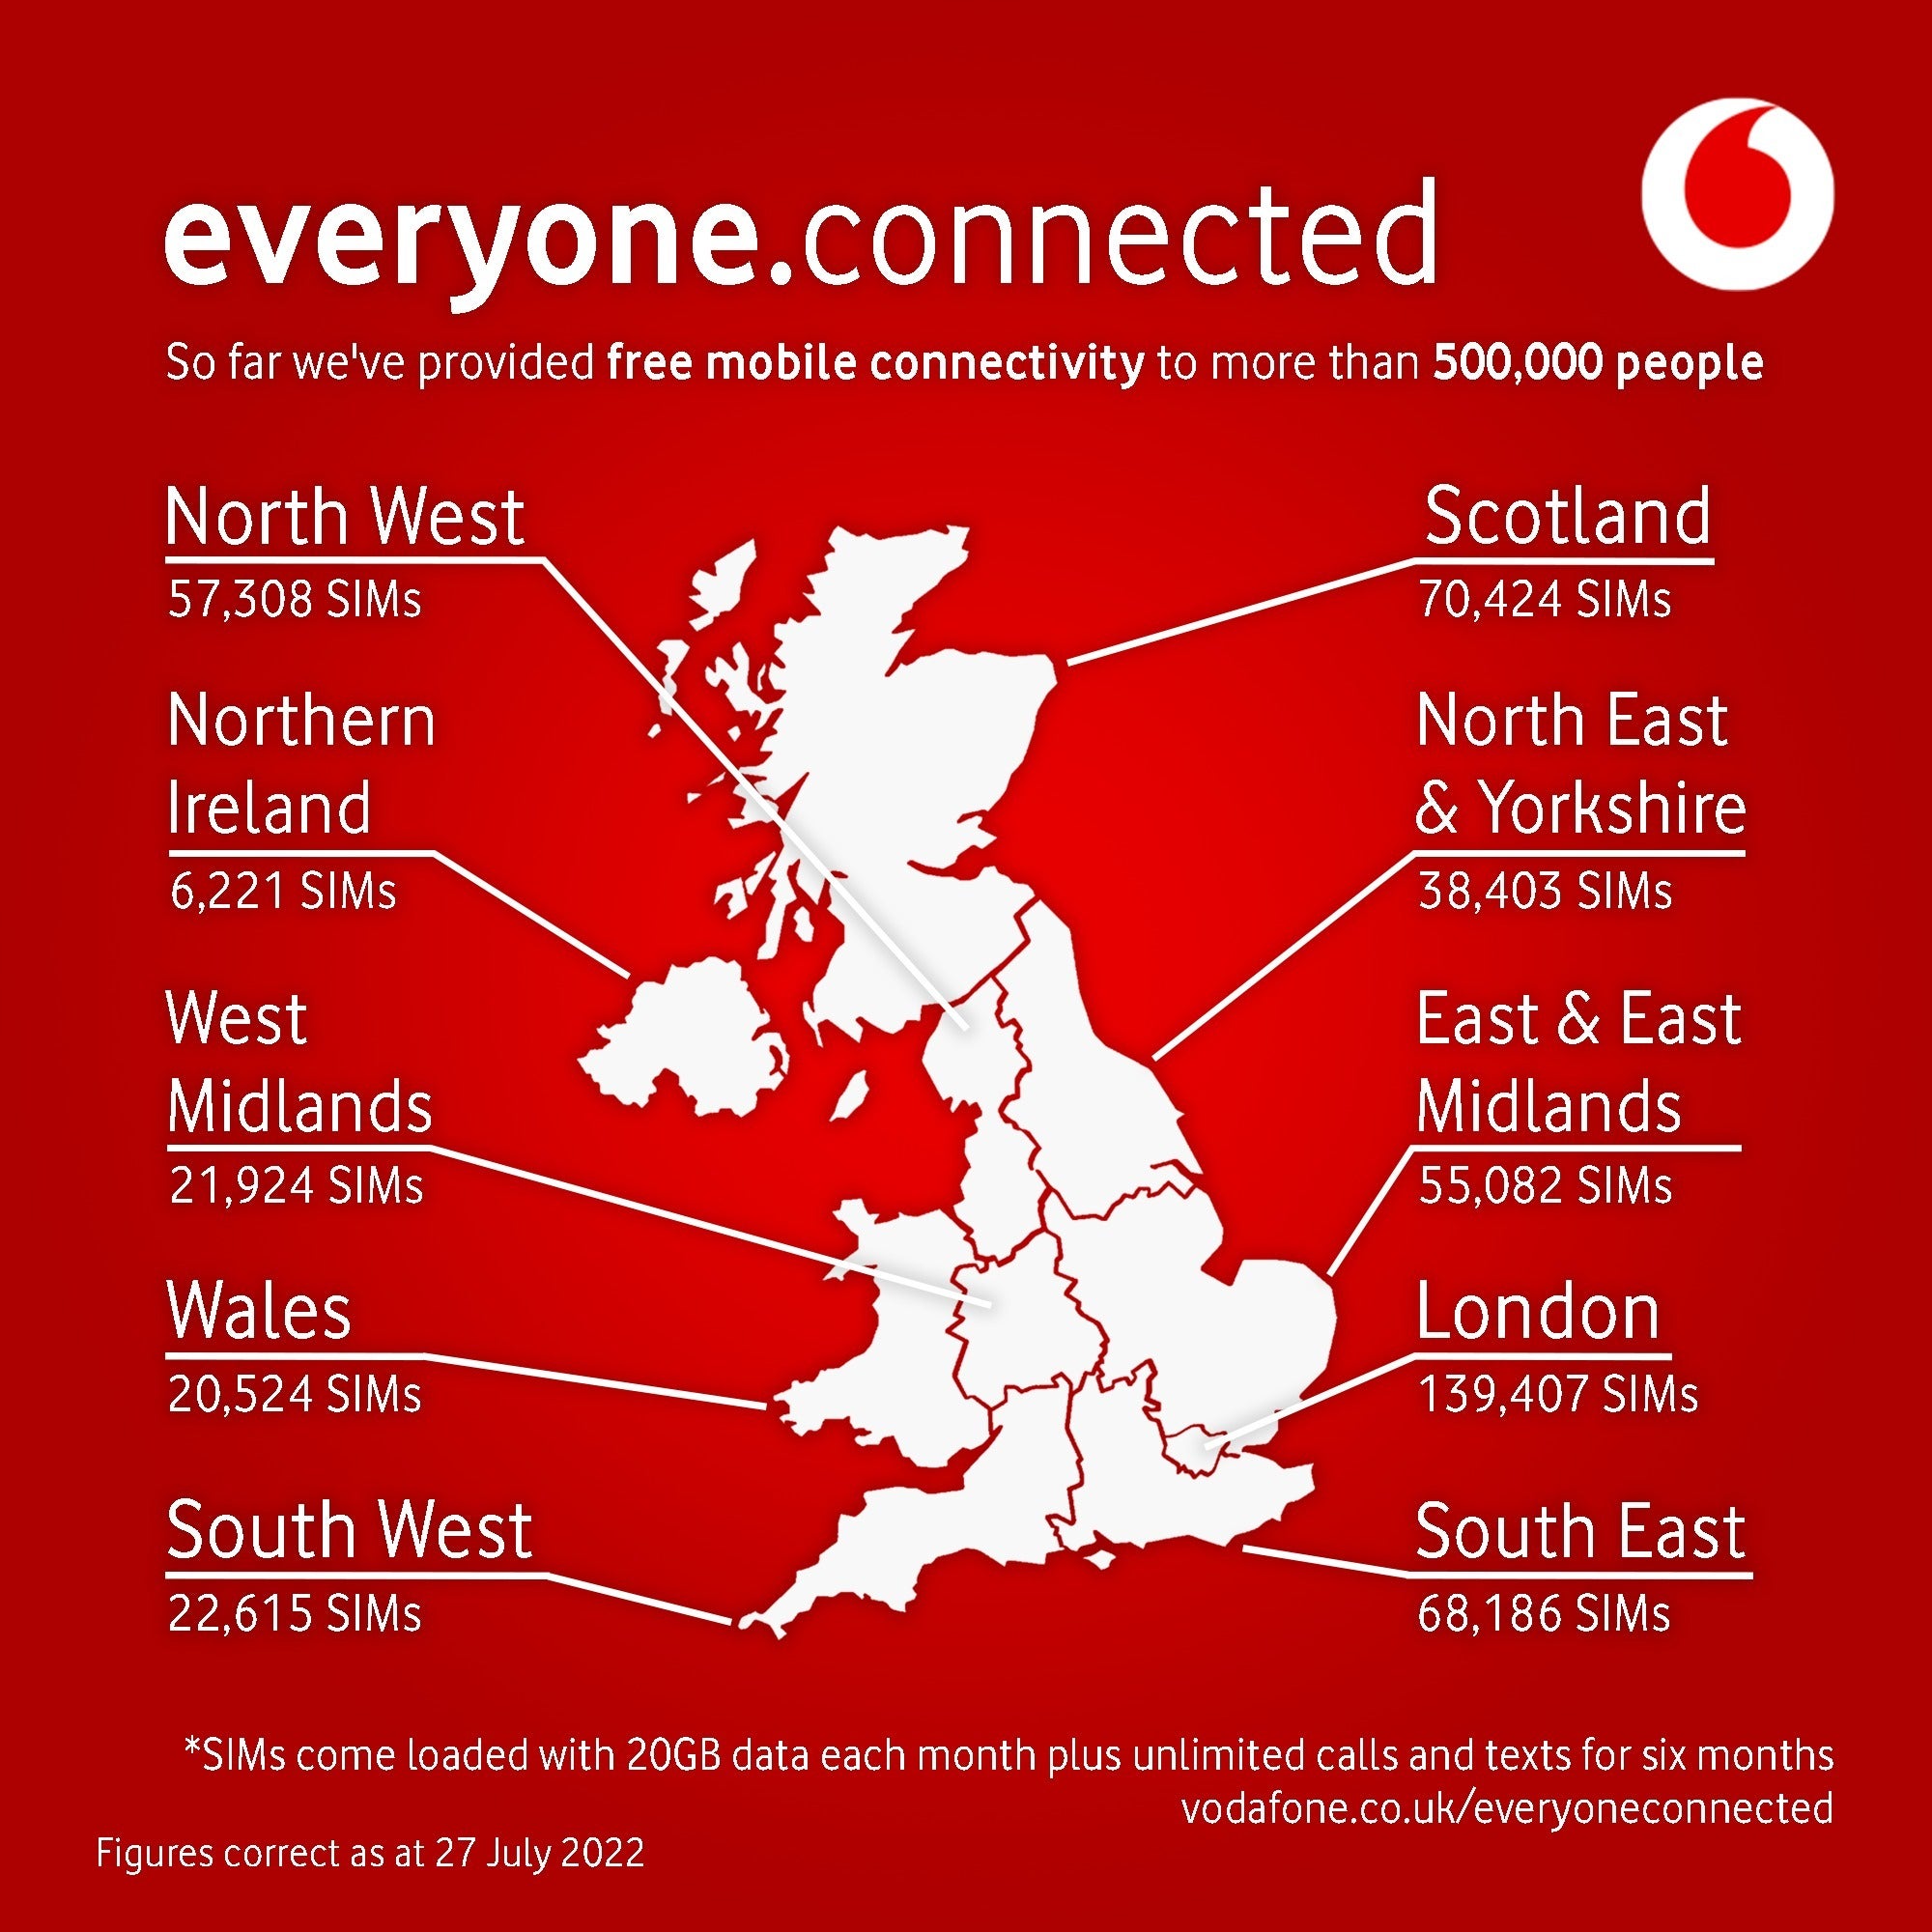 UK: Vodafone donates half a million connections in a bid to “close the digital divide”